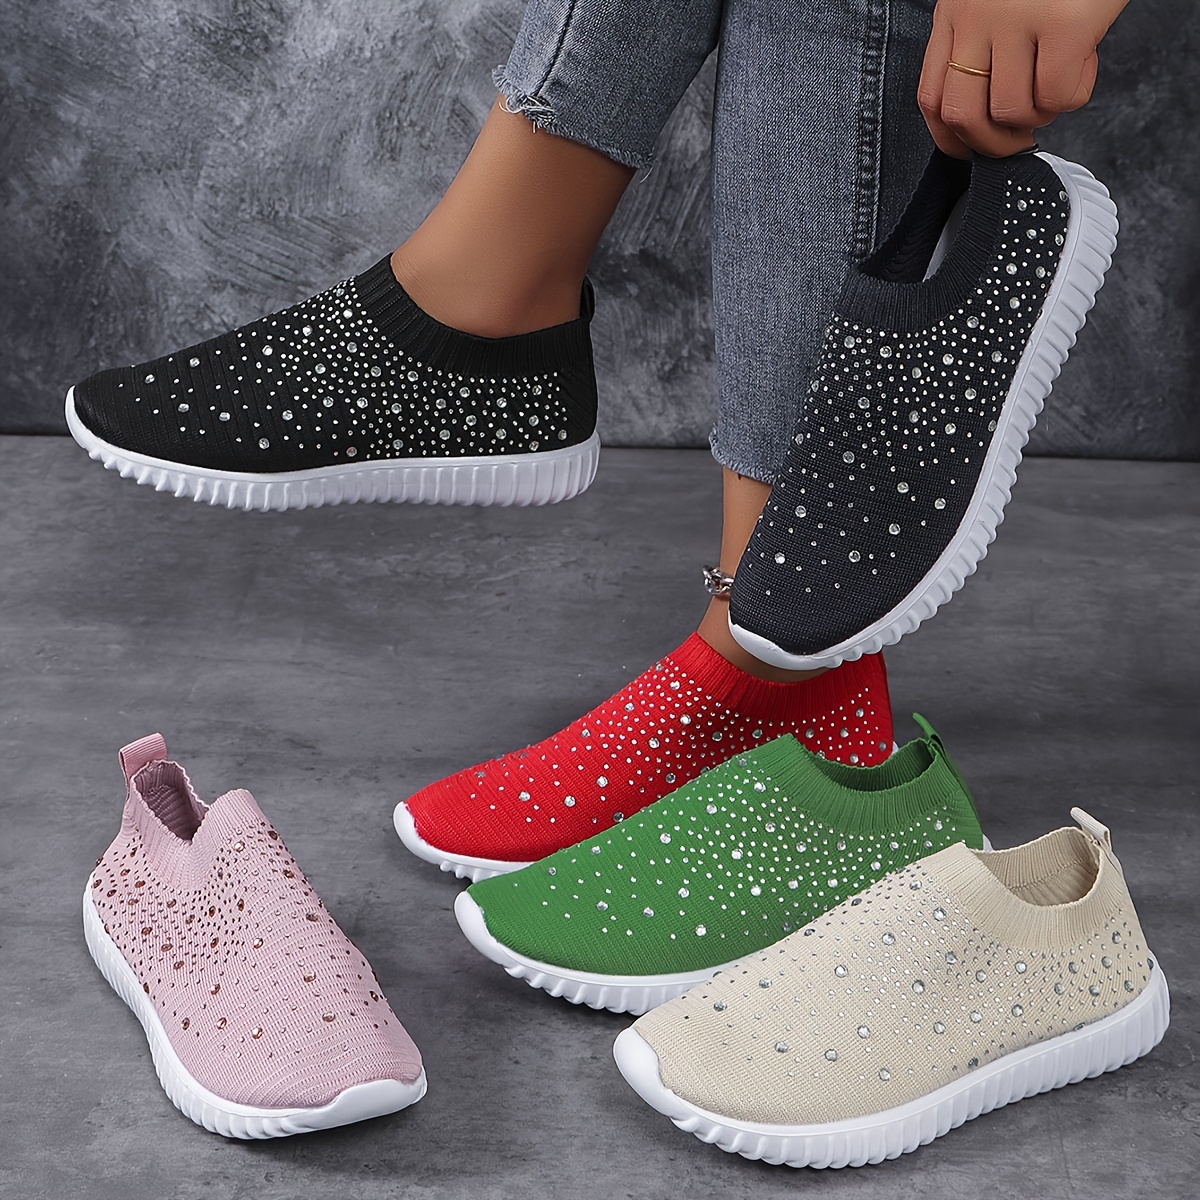 

Women's Walking Sneakers, Slip-on Shoes With Rhinestone Accents, Comfortable And Breathable Footwear For Outdoor Camping And Daily Wear